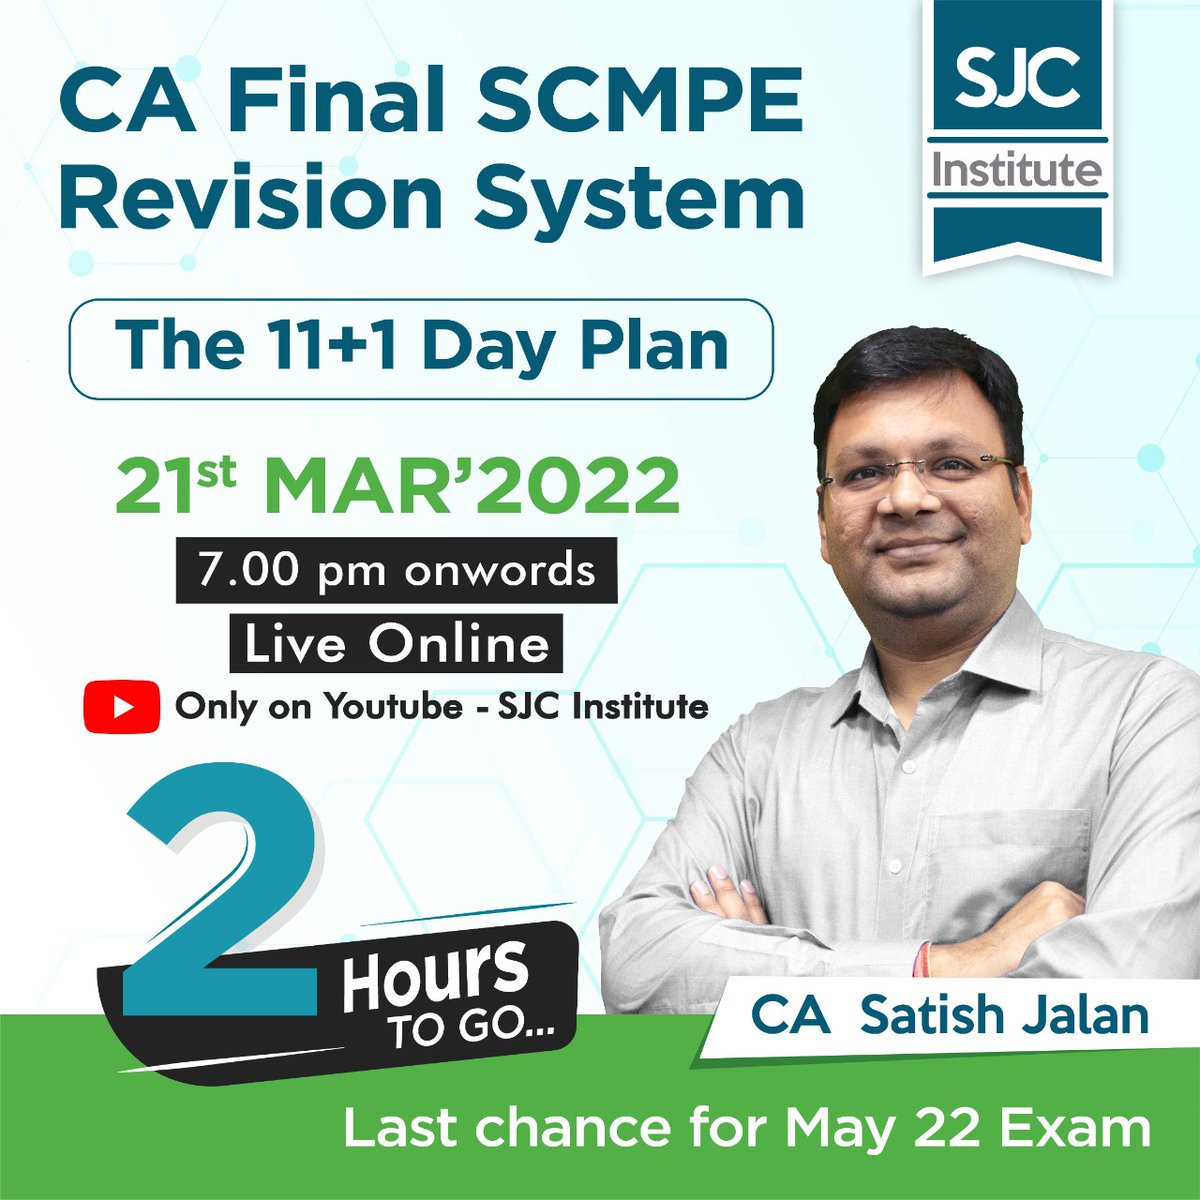 Only 2 hours to go.

If you have not filled out the form yet, what are you waiting for?

Fill out this form to register for the Revision system - hubs.ly/Q016kRd70

#cafinalscmpe #revisionnotes #sjcinstitute #satishjalan #CAfinal #SCMPE #Costing #cafinal #icai